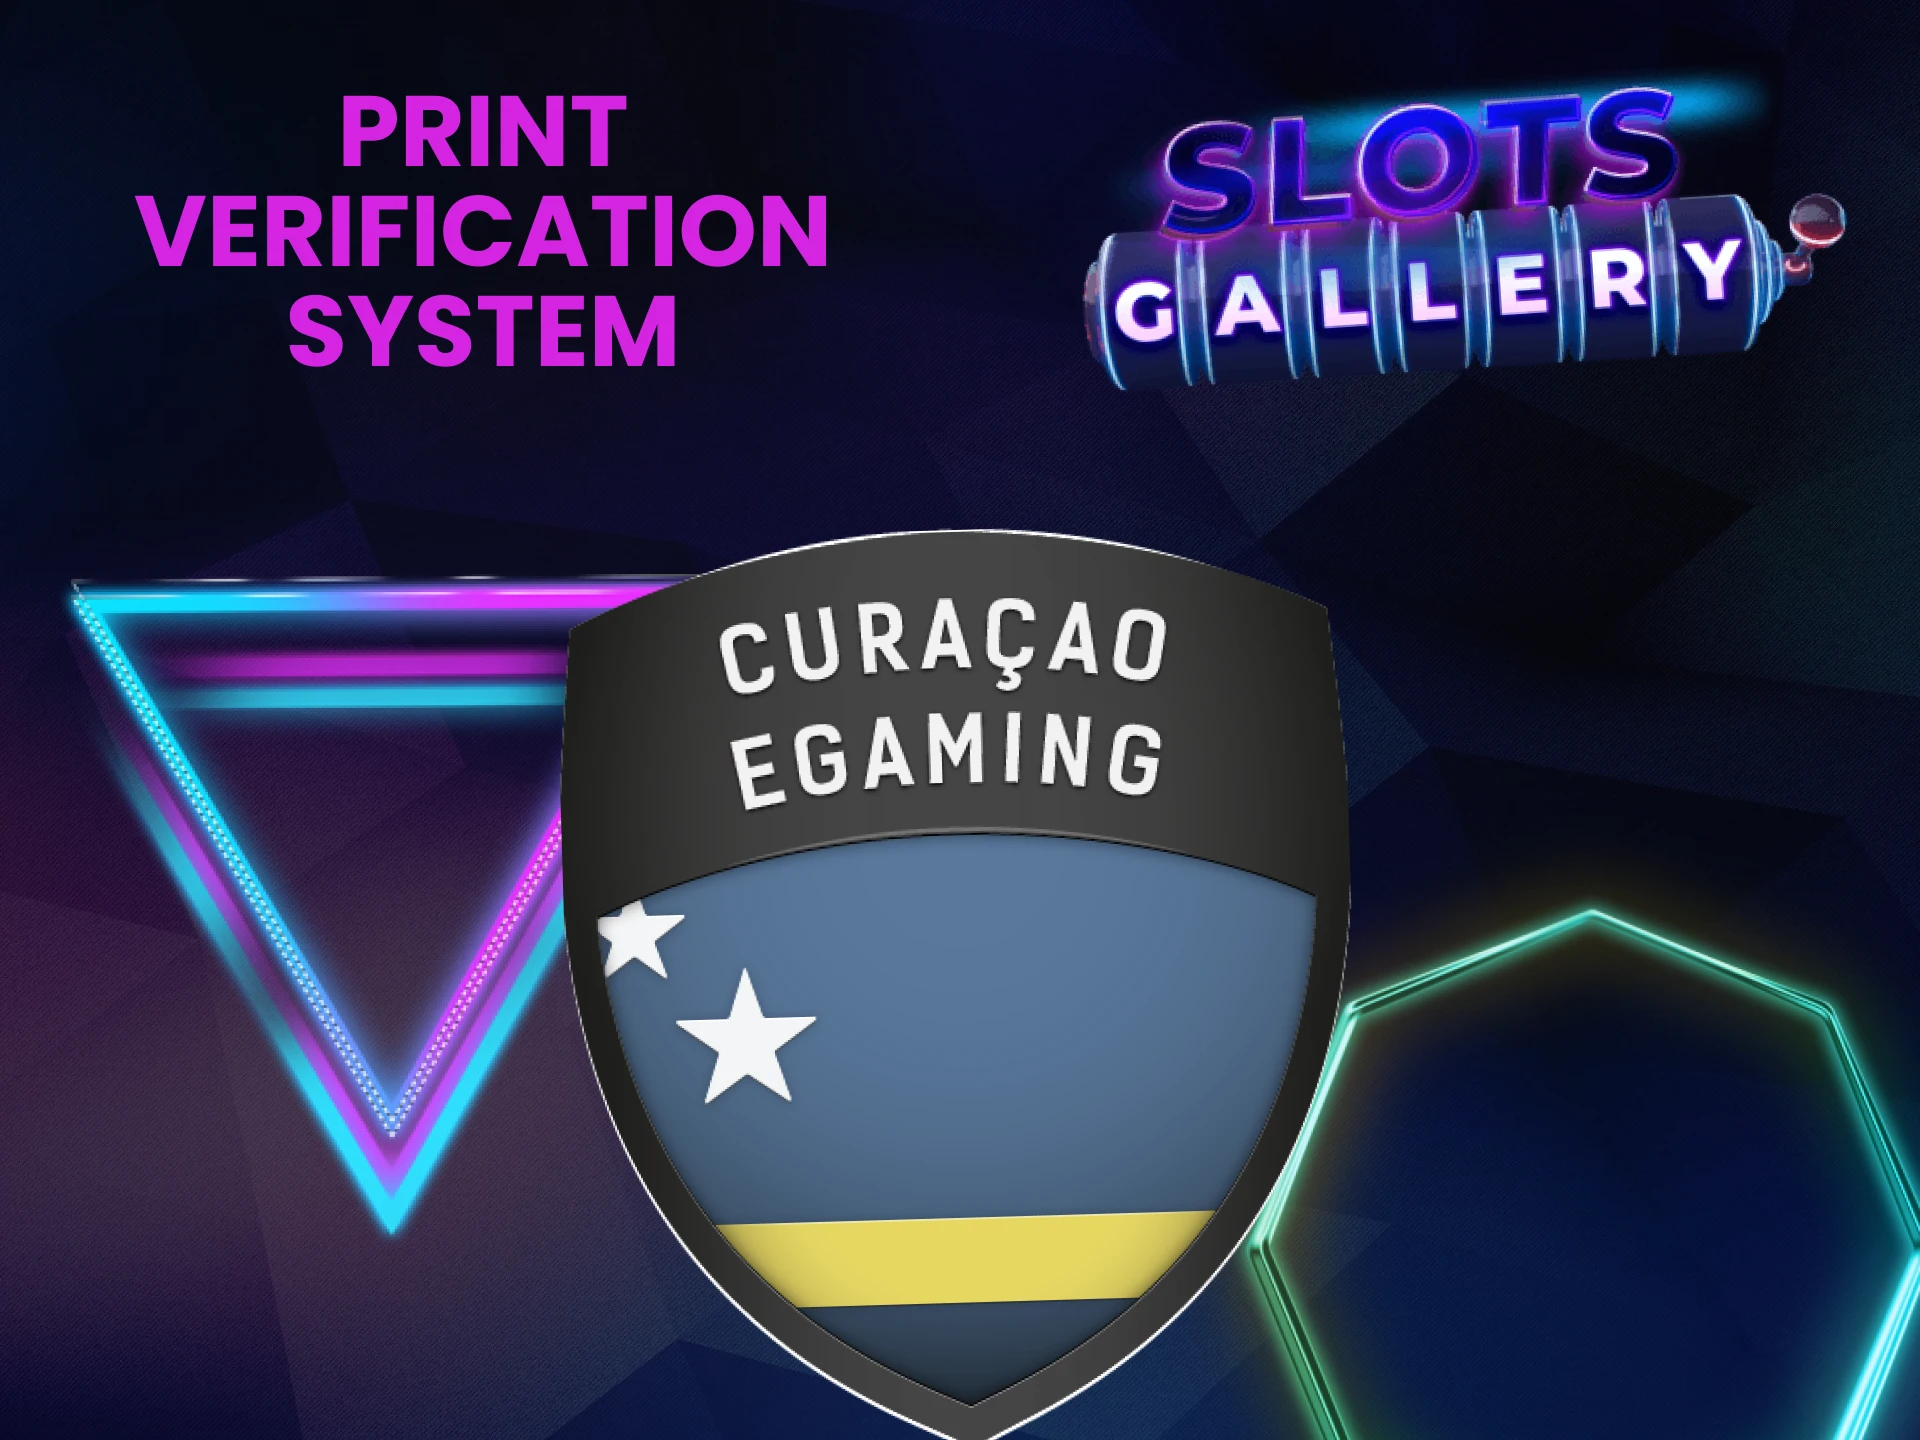 We will talk about the print verification system on the Slots Gallery website.